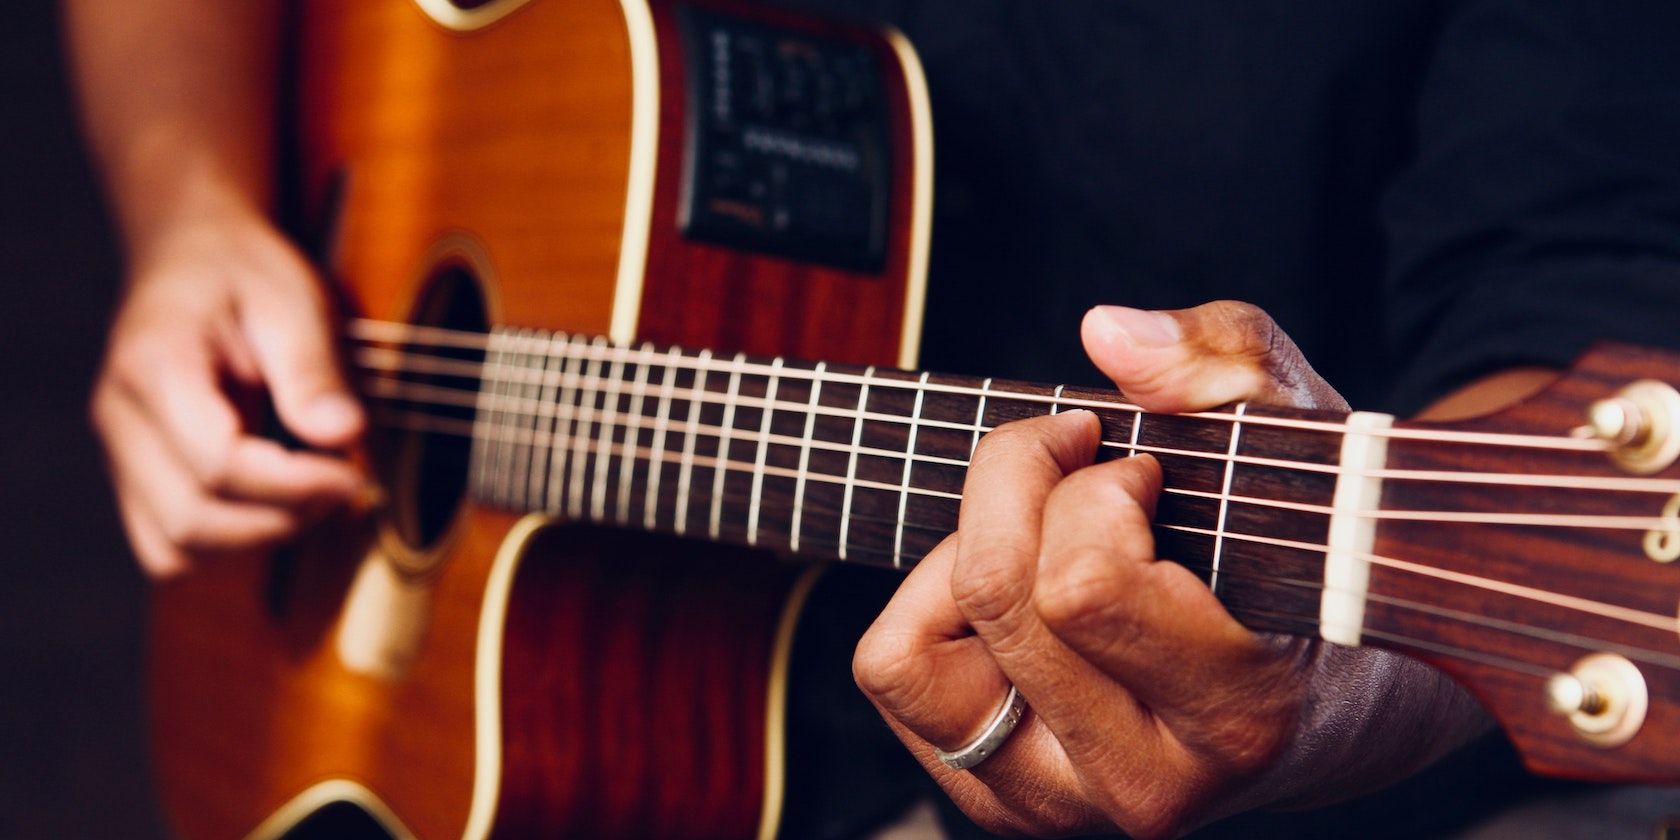 Electro-Acoustic Guitars Are Better Than Acoustic Guitars. Here's Why...